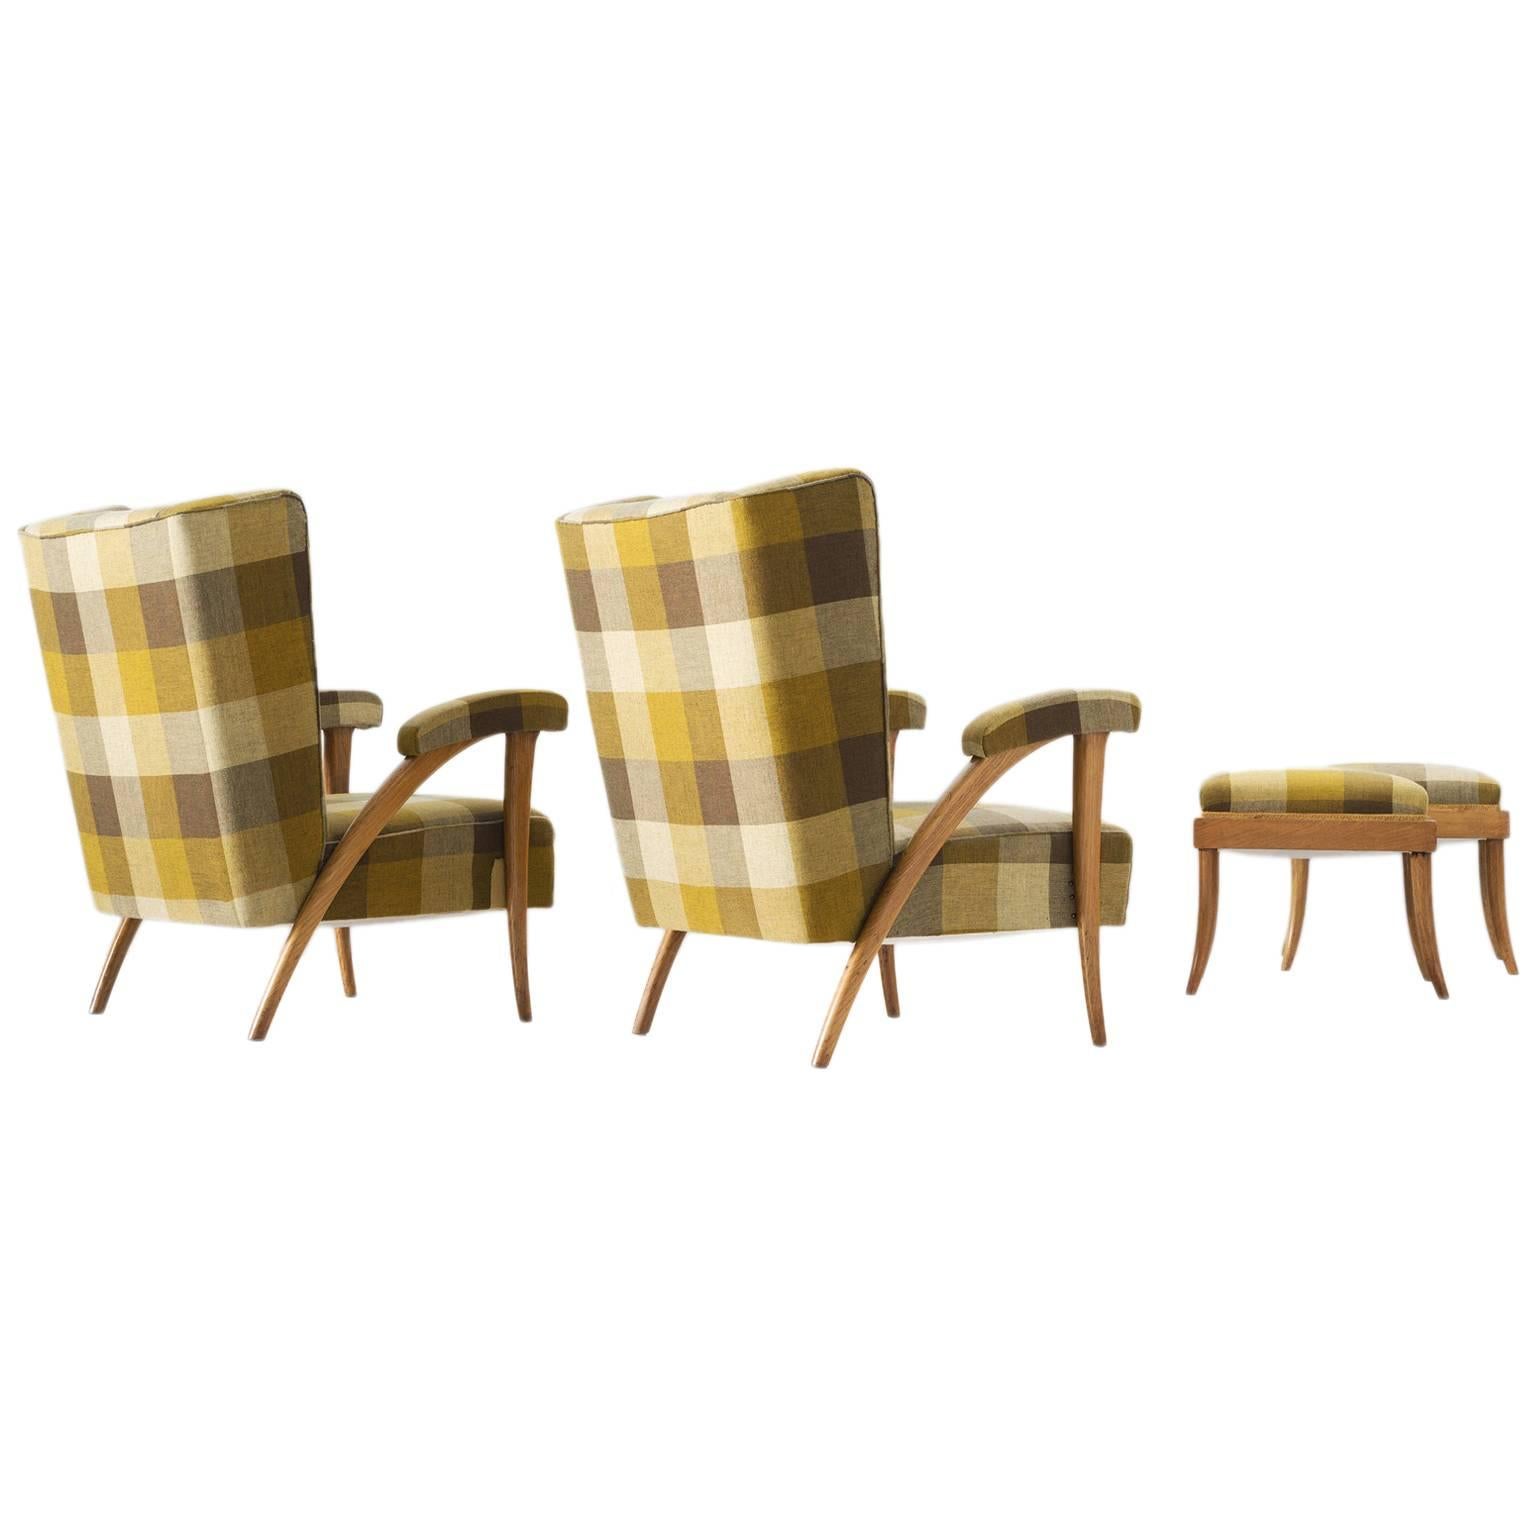 Pair of Italian Lounge Chairs and Ottomans in Green Checkered Upholstery